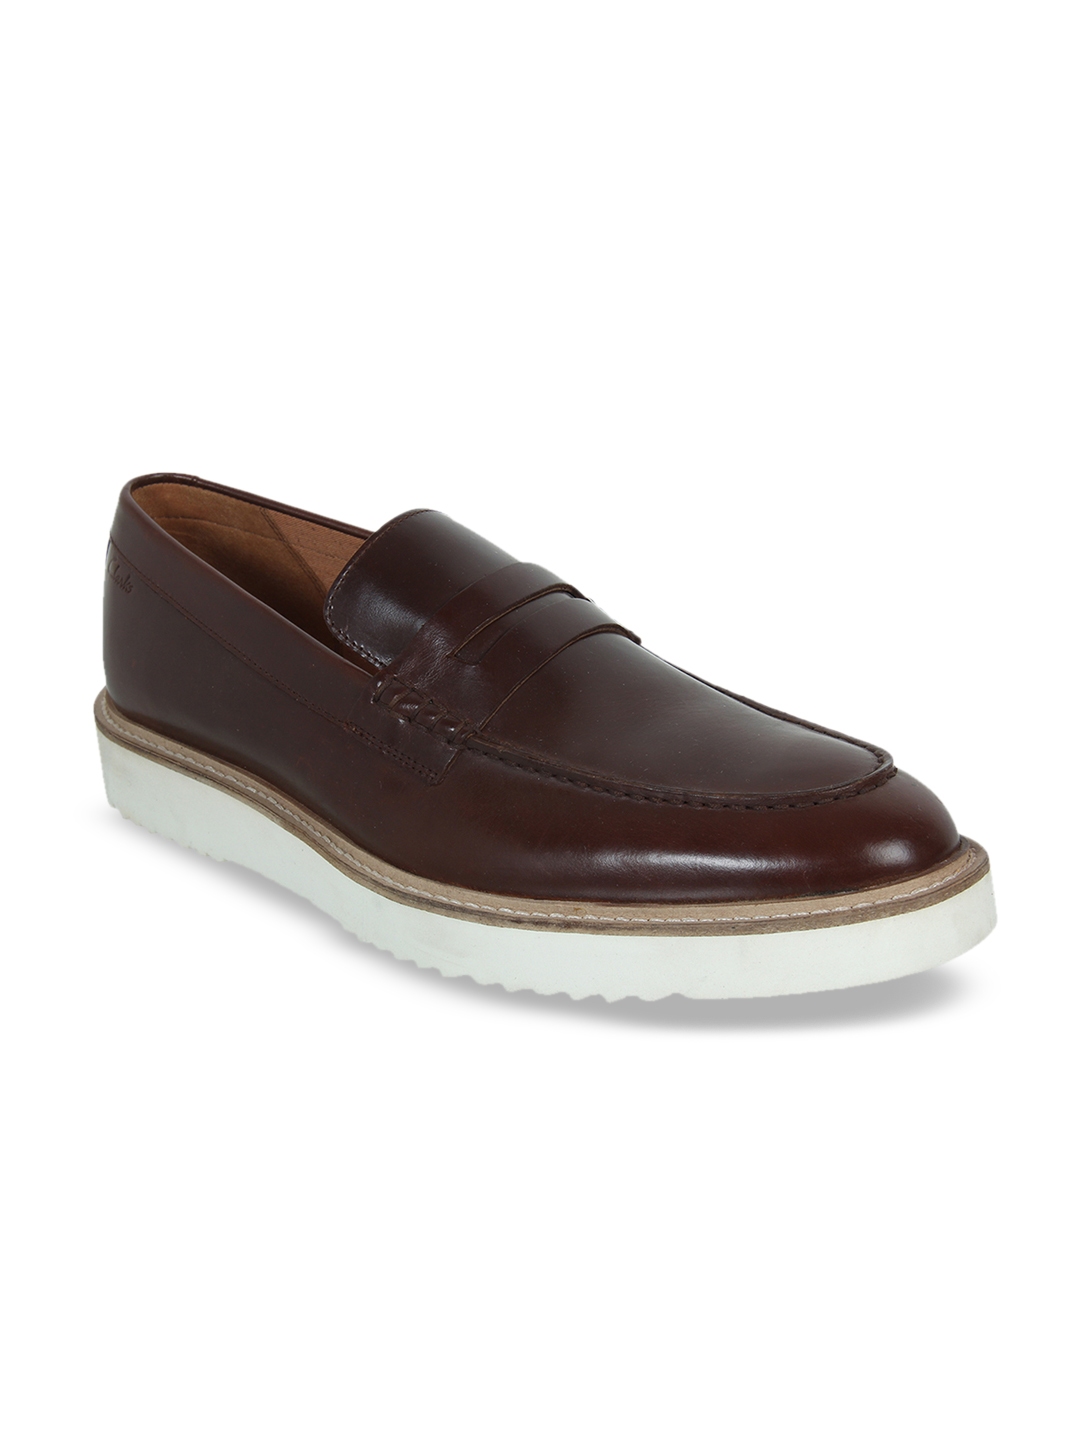 Buy Clarks Men Brown Leather Loafers - Casual Shoes for Men 11453466 ...